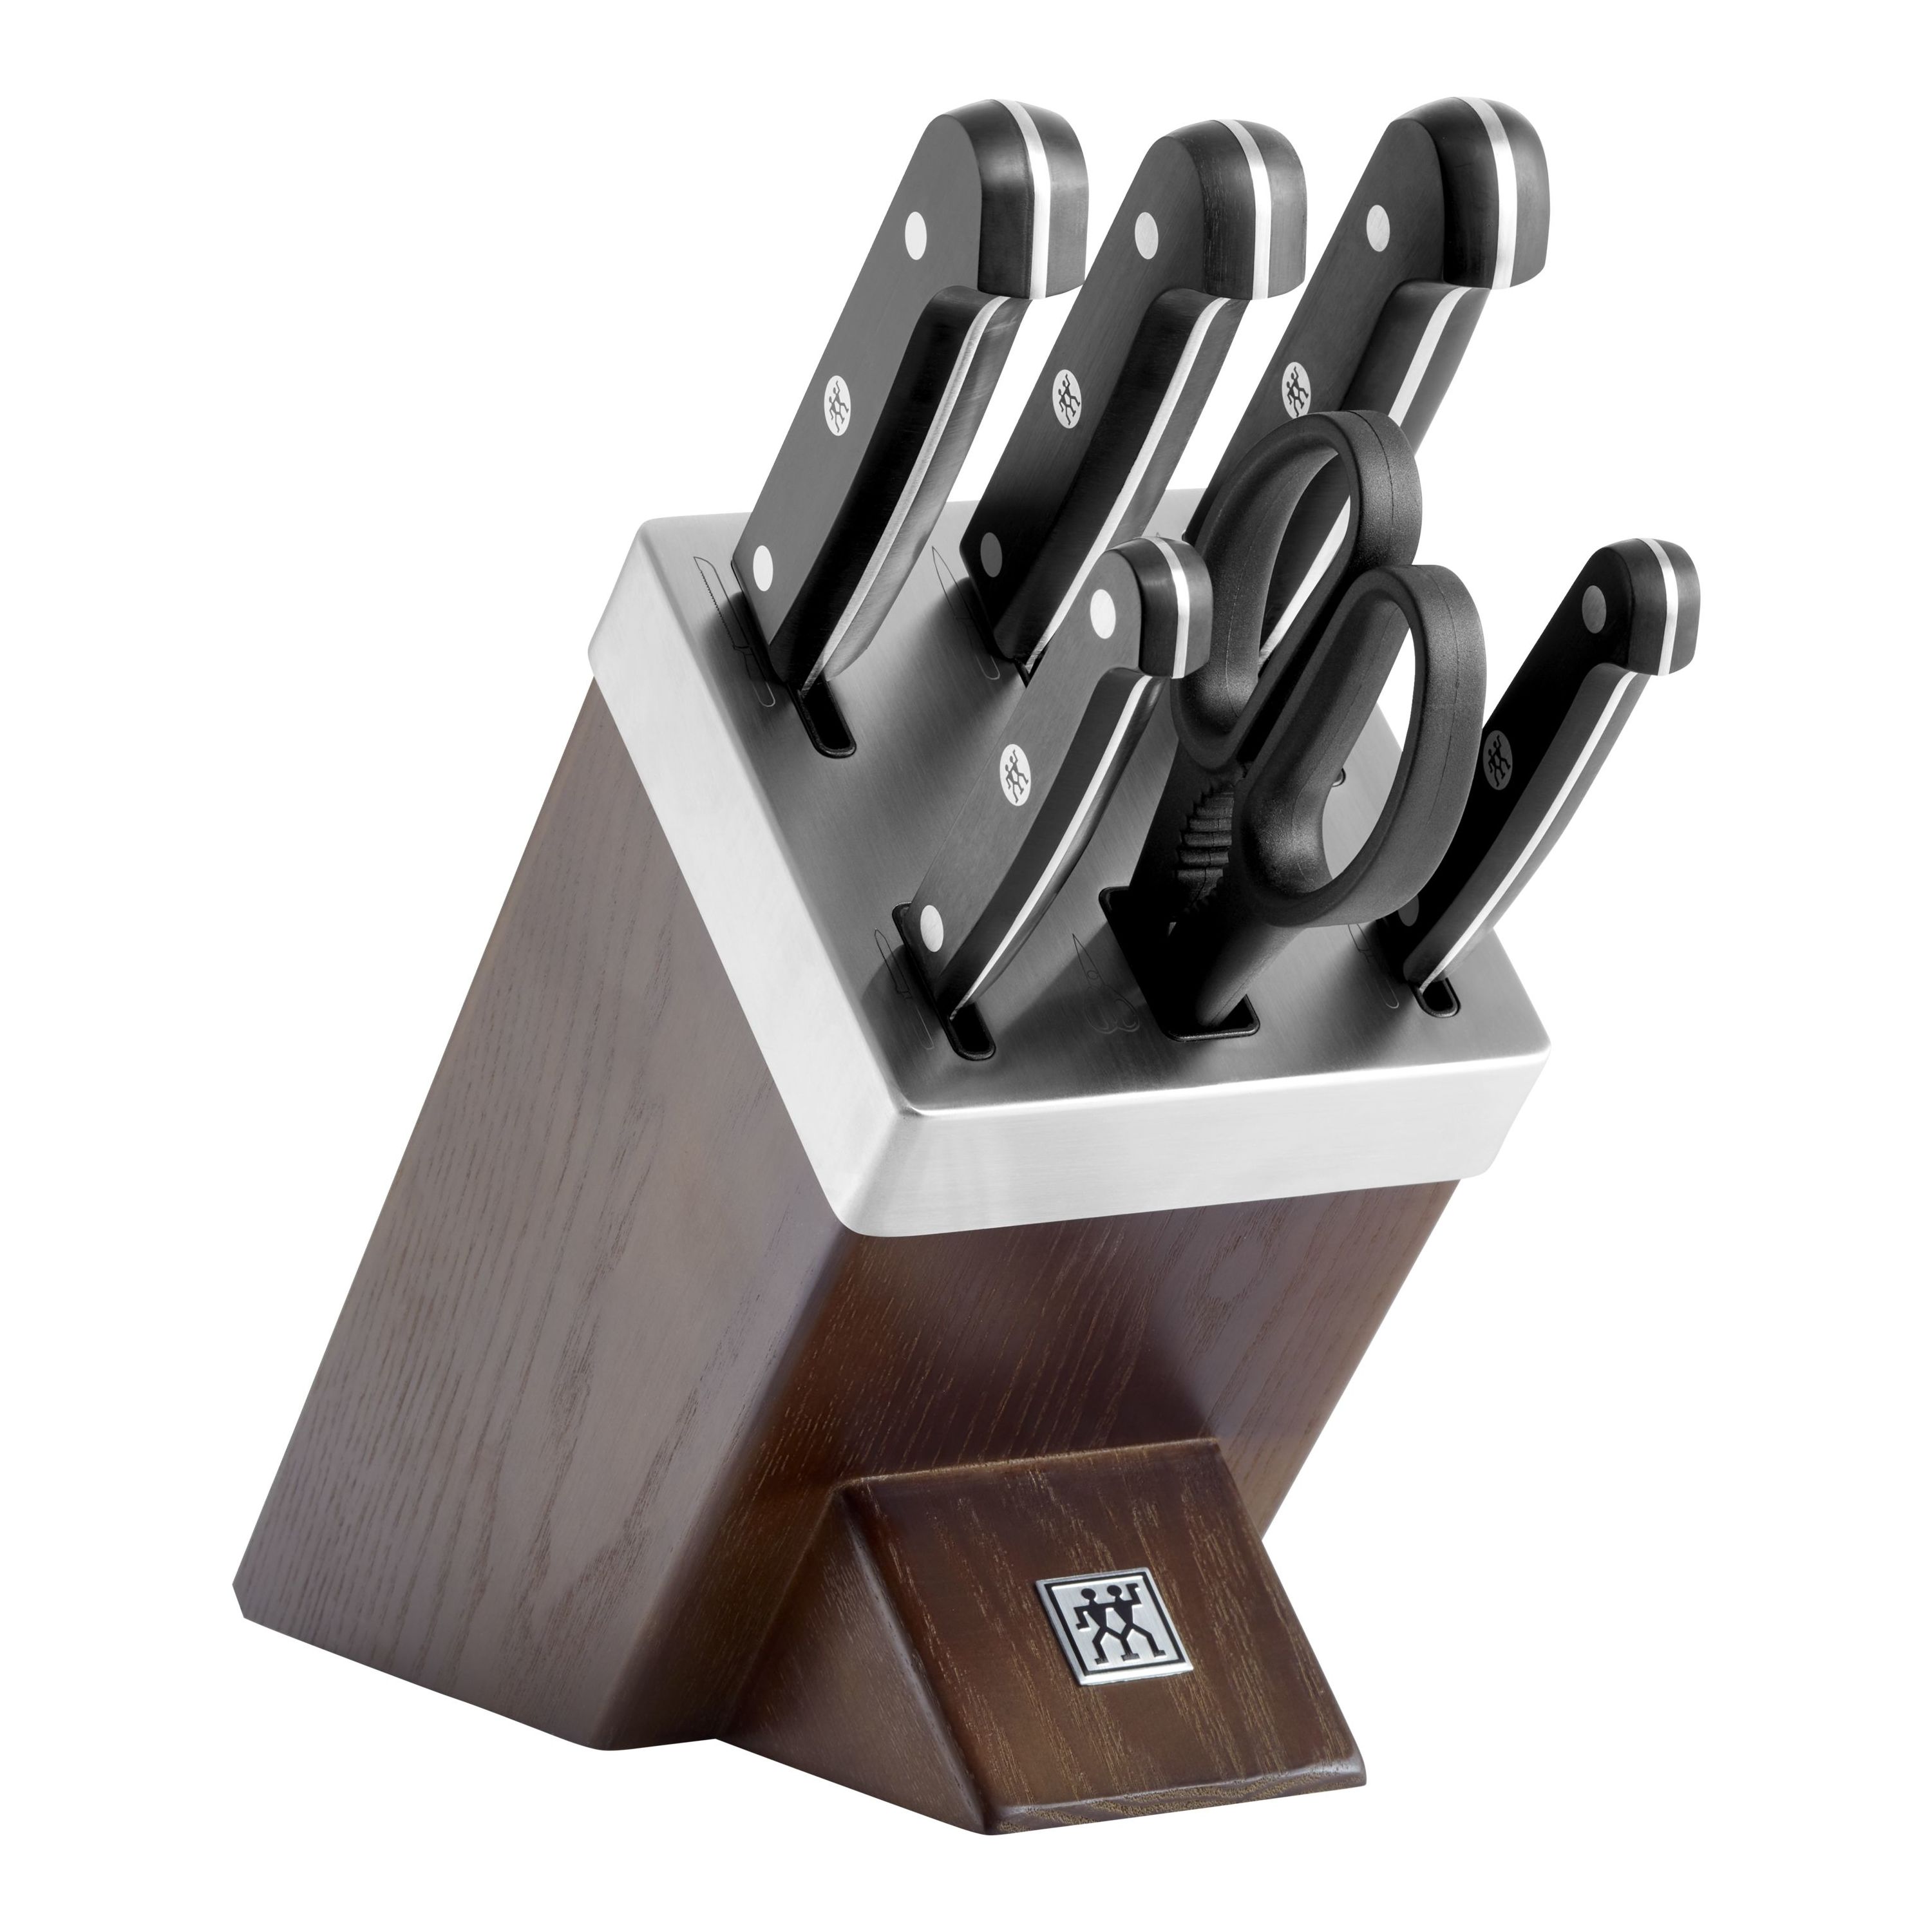 Buy ZWILLING Gourmet Knife block set with KiS technology